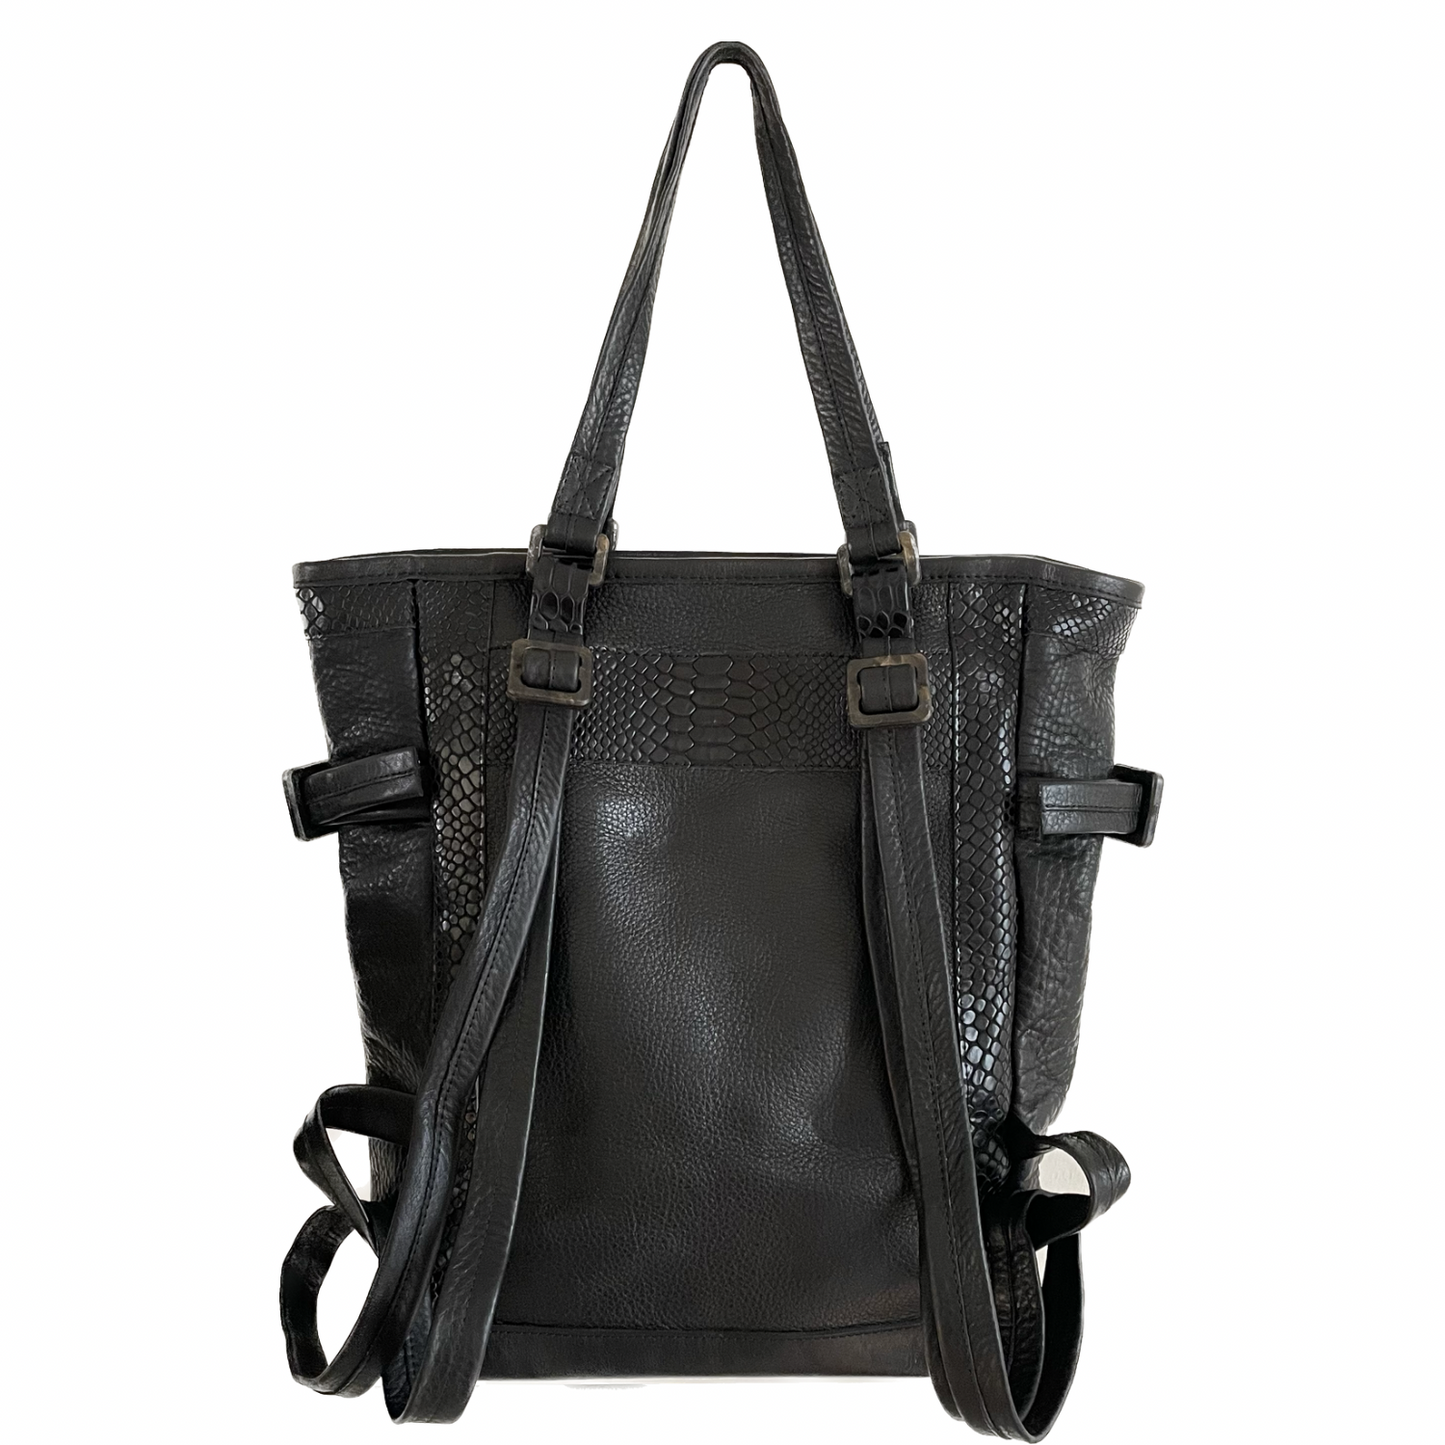 Profound Black Repurposed Leather Tote Backpack